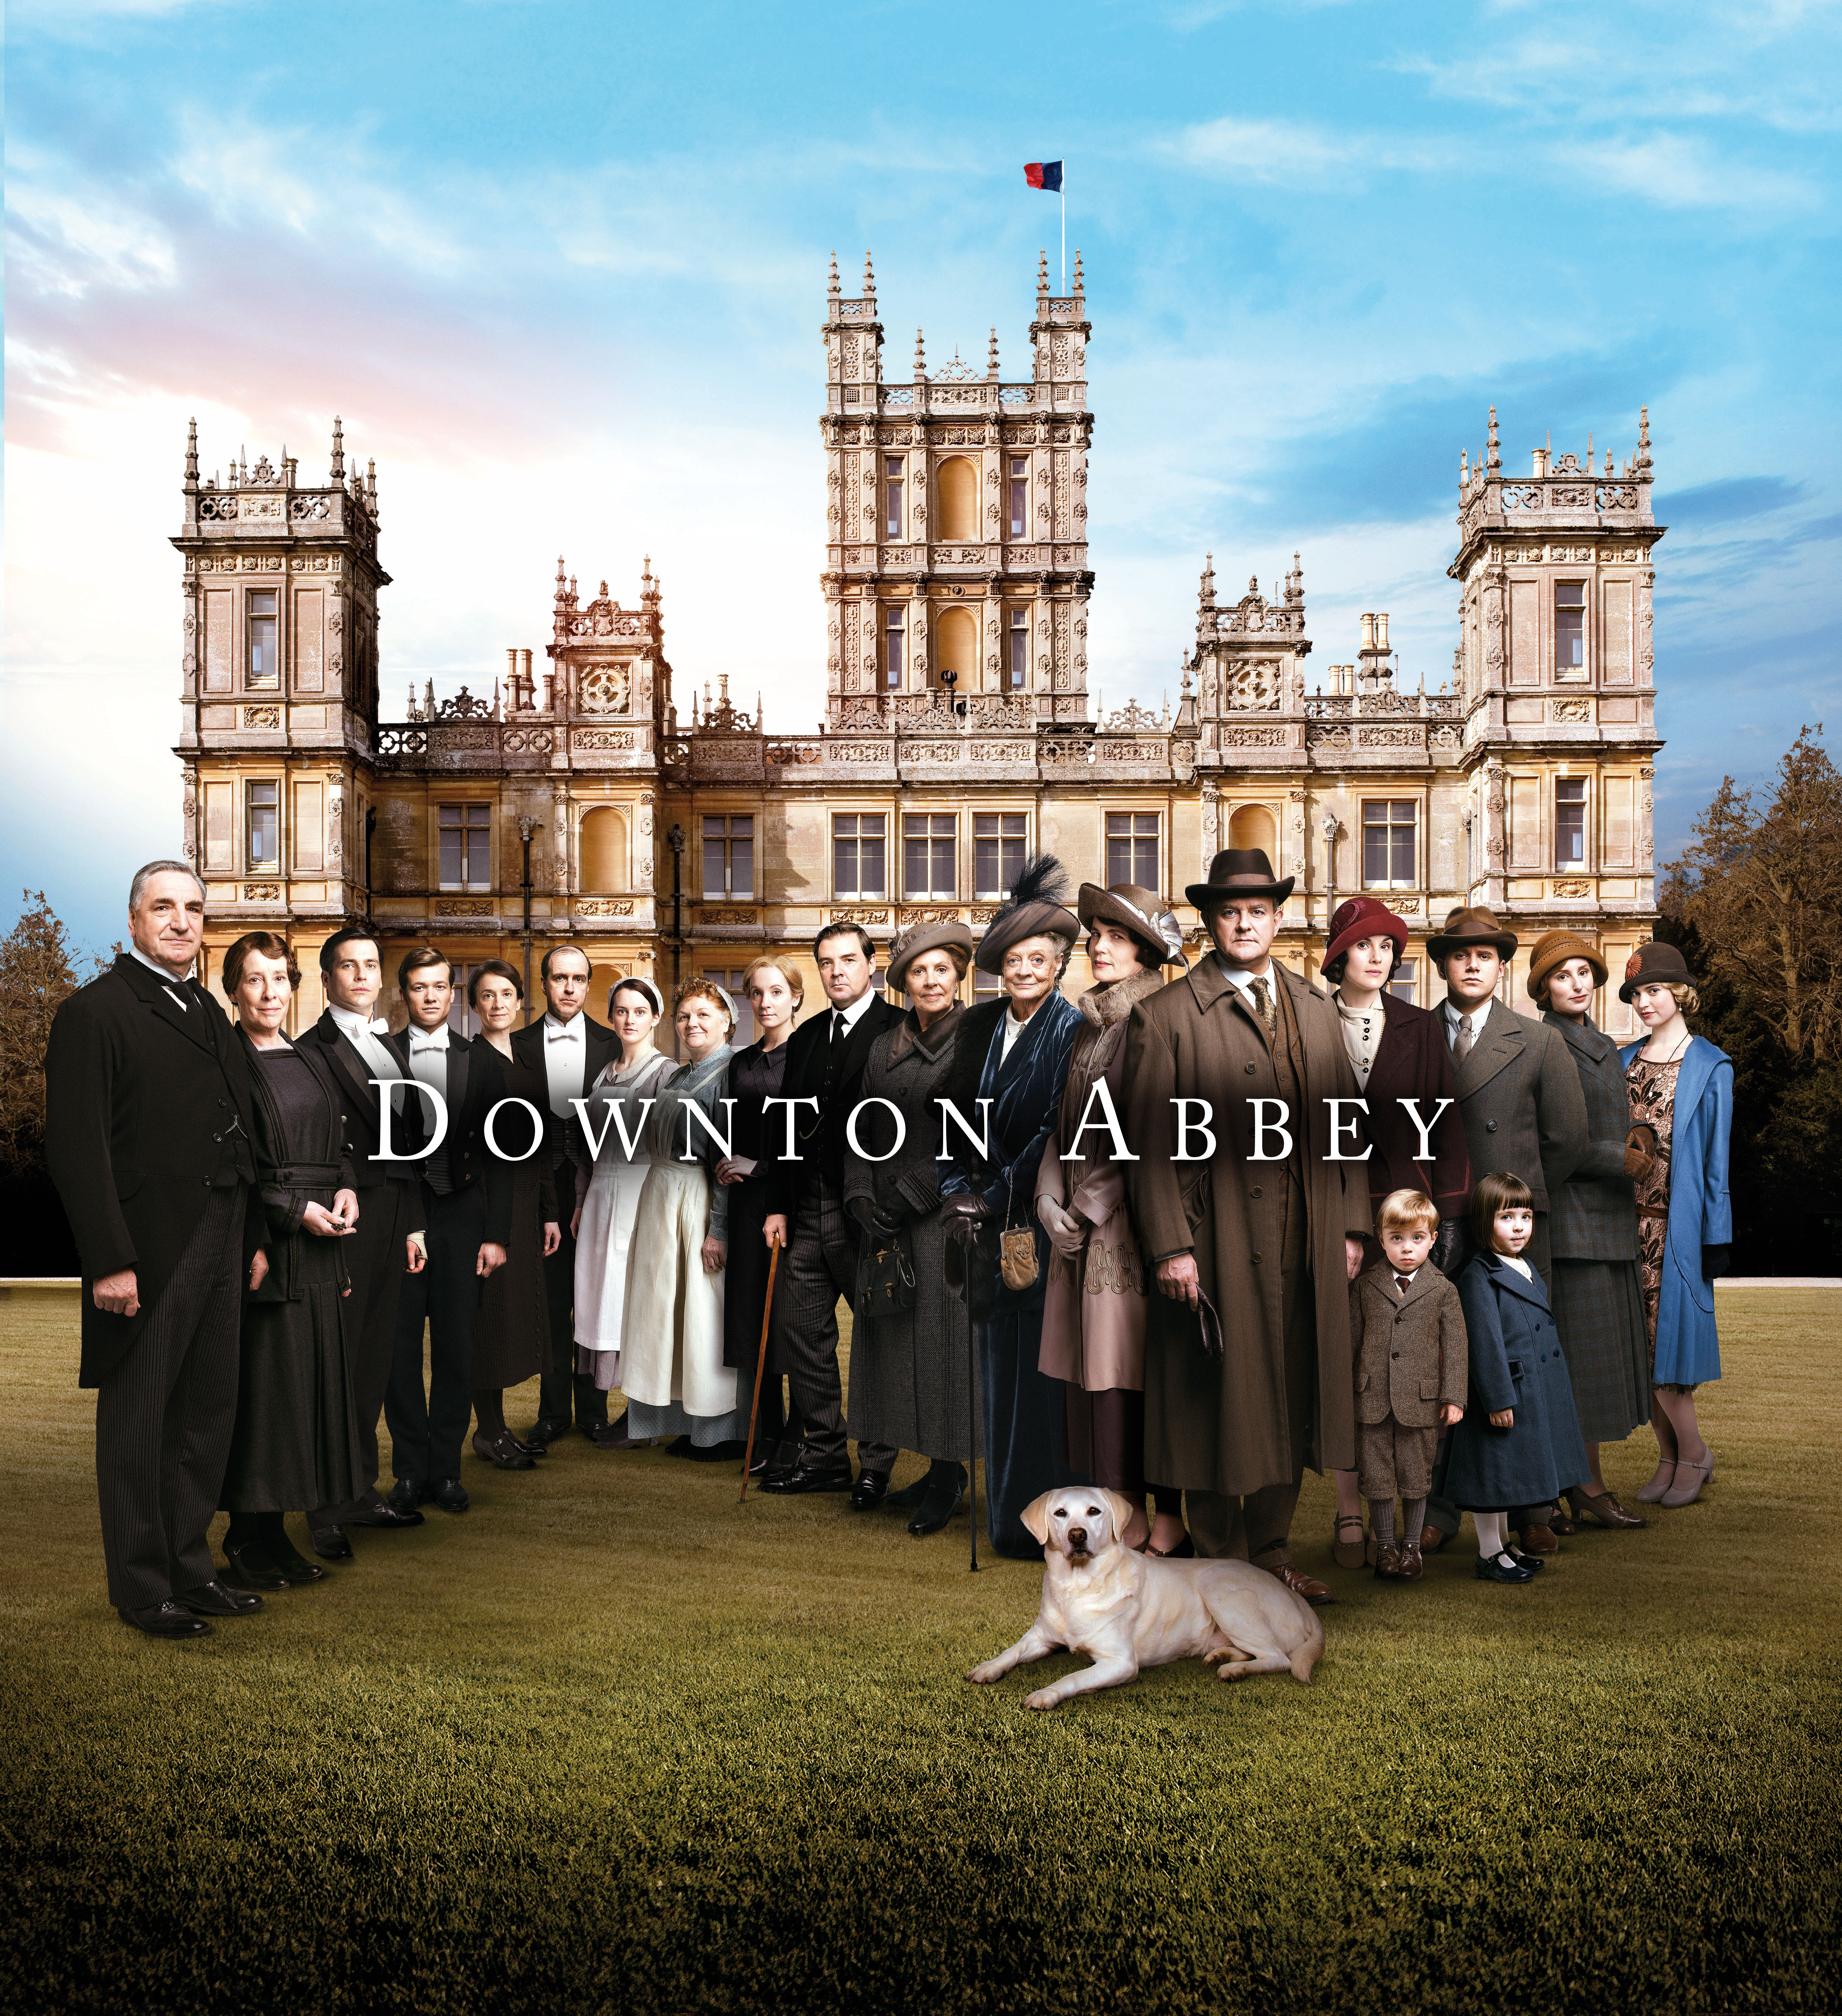 "Downton Abbey's" dramatic new Series 5 key art. (Photo: Courtesy of ©Nick Briggs/Carnival Films 2014 for MASTERPIECE)